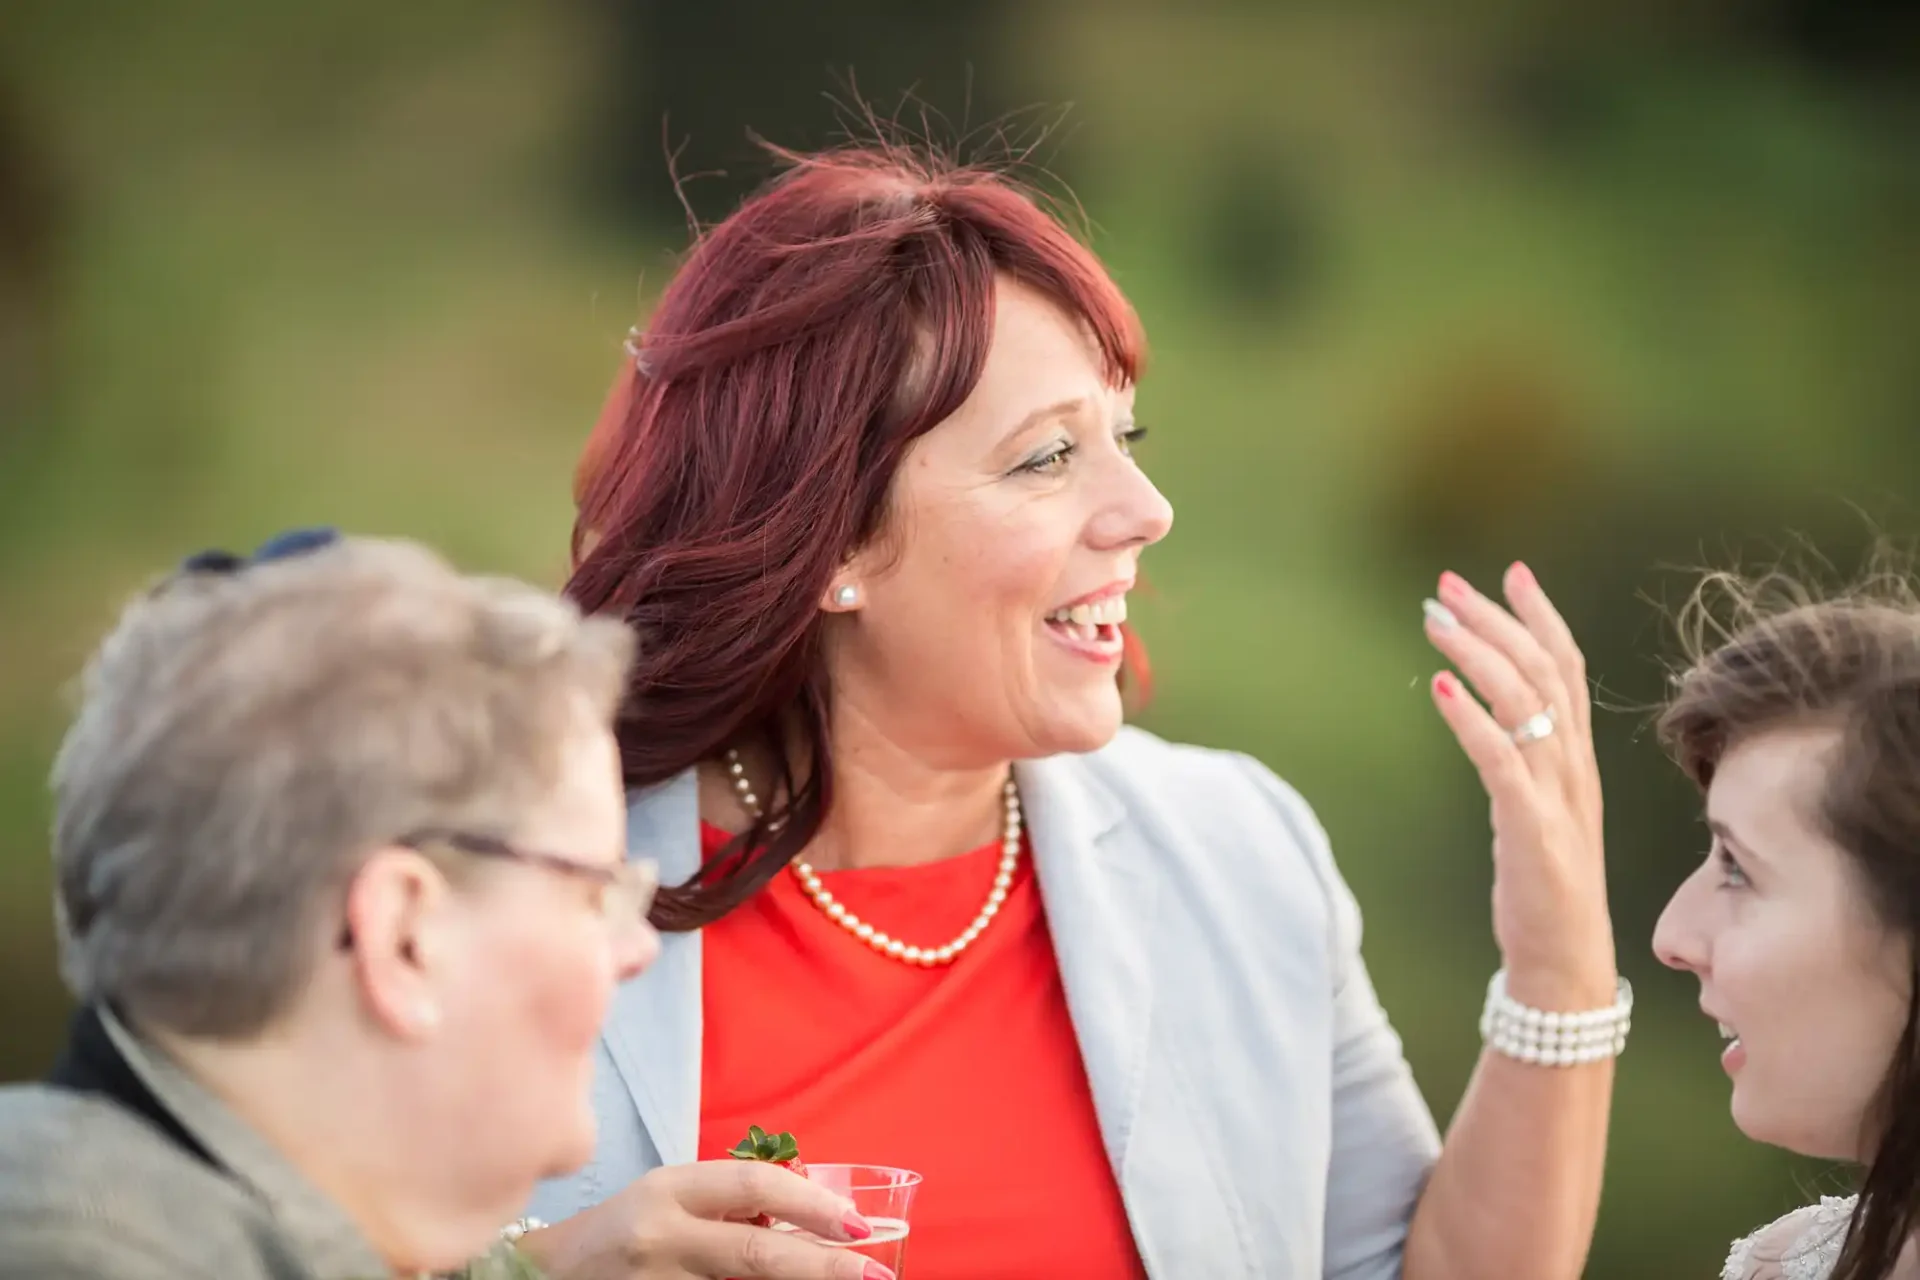 A woman with red hair laughing and talking with two people at an outdoor gathering.